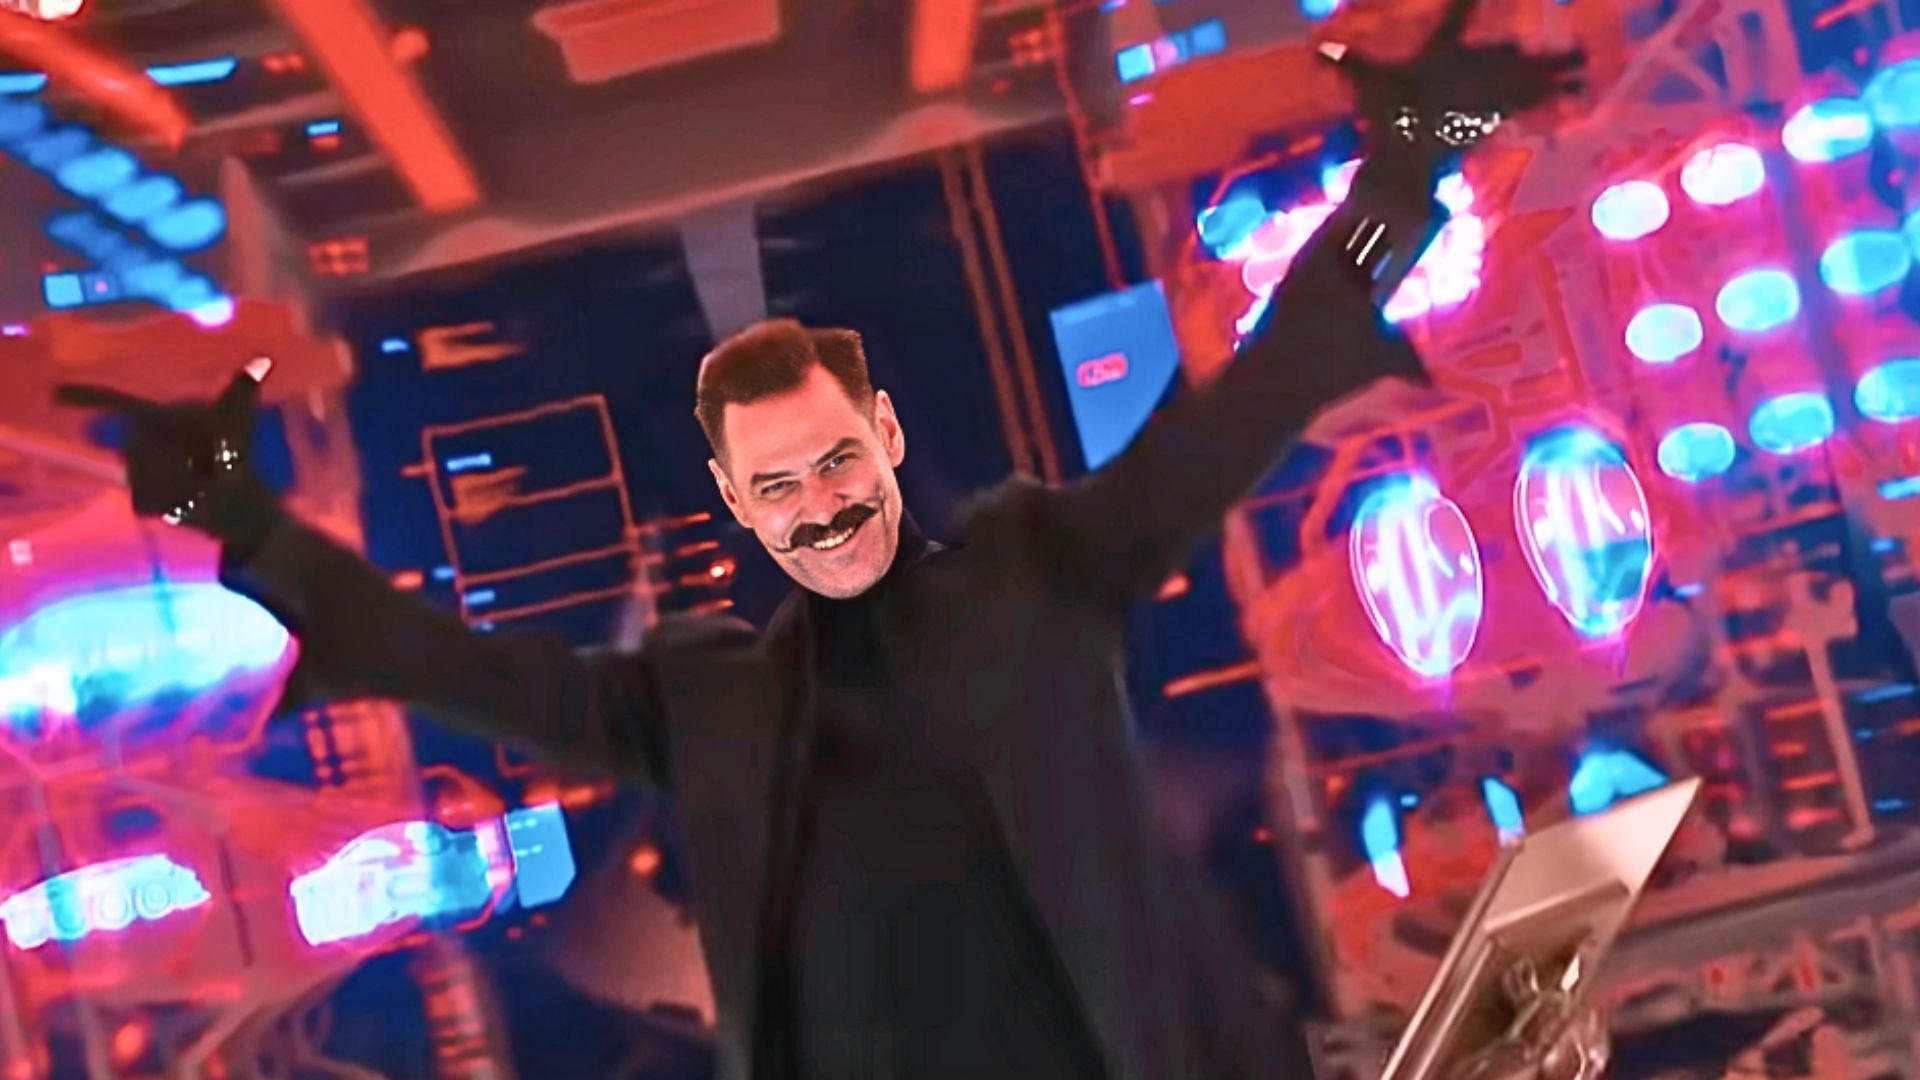 Jim Carrey is confirmed to return as Dr. Robotnik in Sonic the Hedgehog 3, despite previously hinting at retirement (Image via YouTube/Paramount Pictures, 1:27)